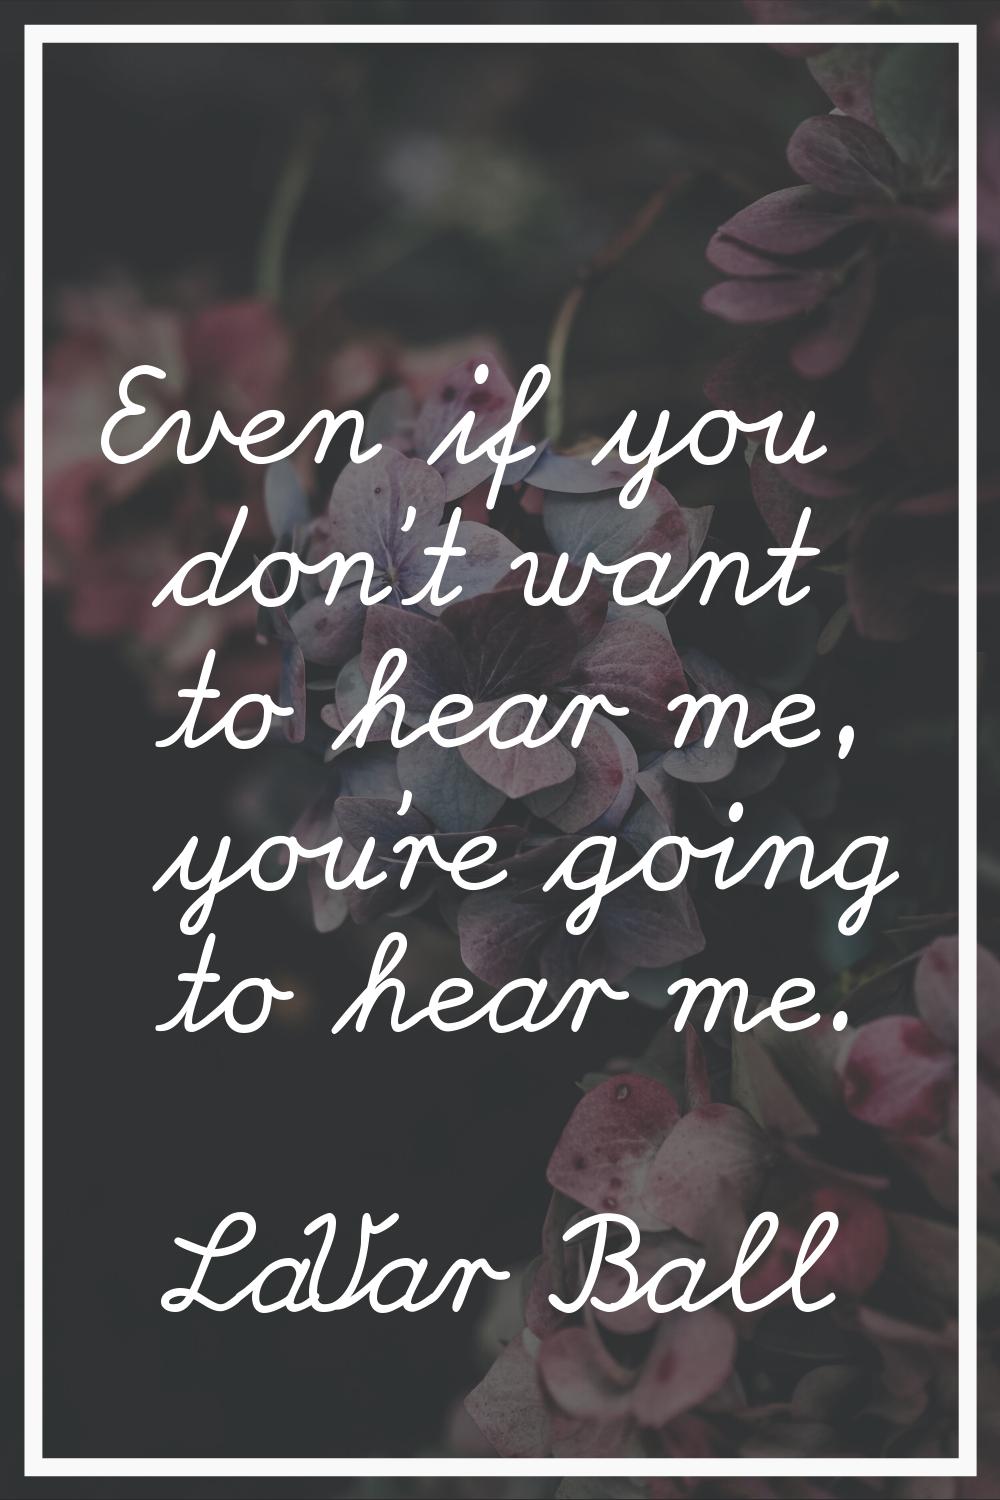 Even if you don't want to hear me, you're going to hear me.